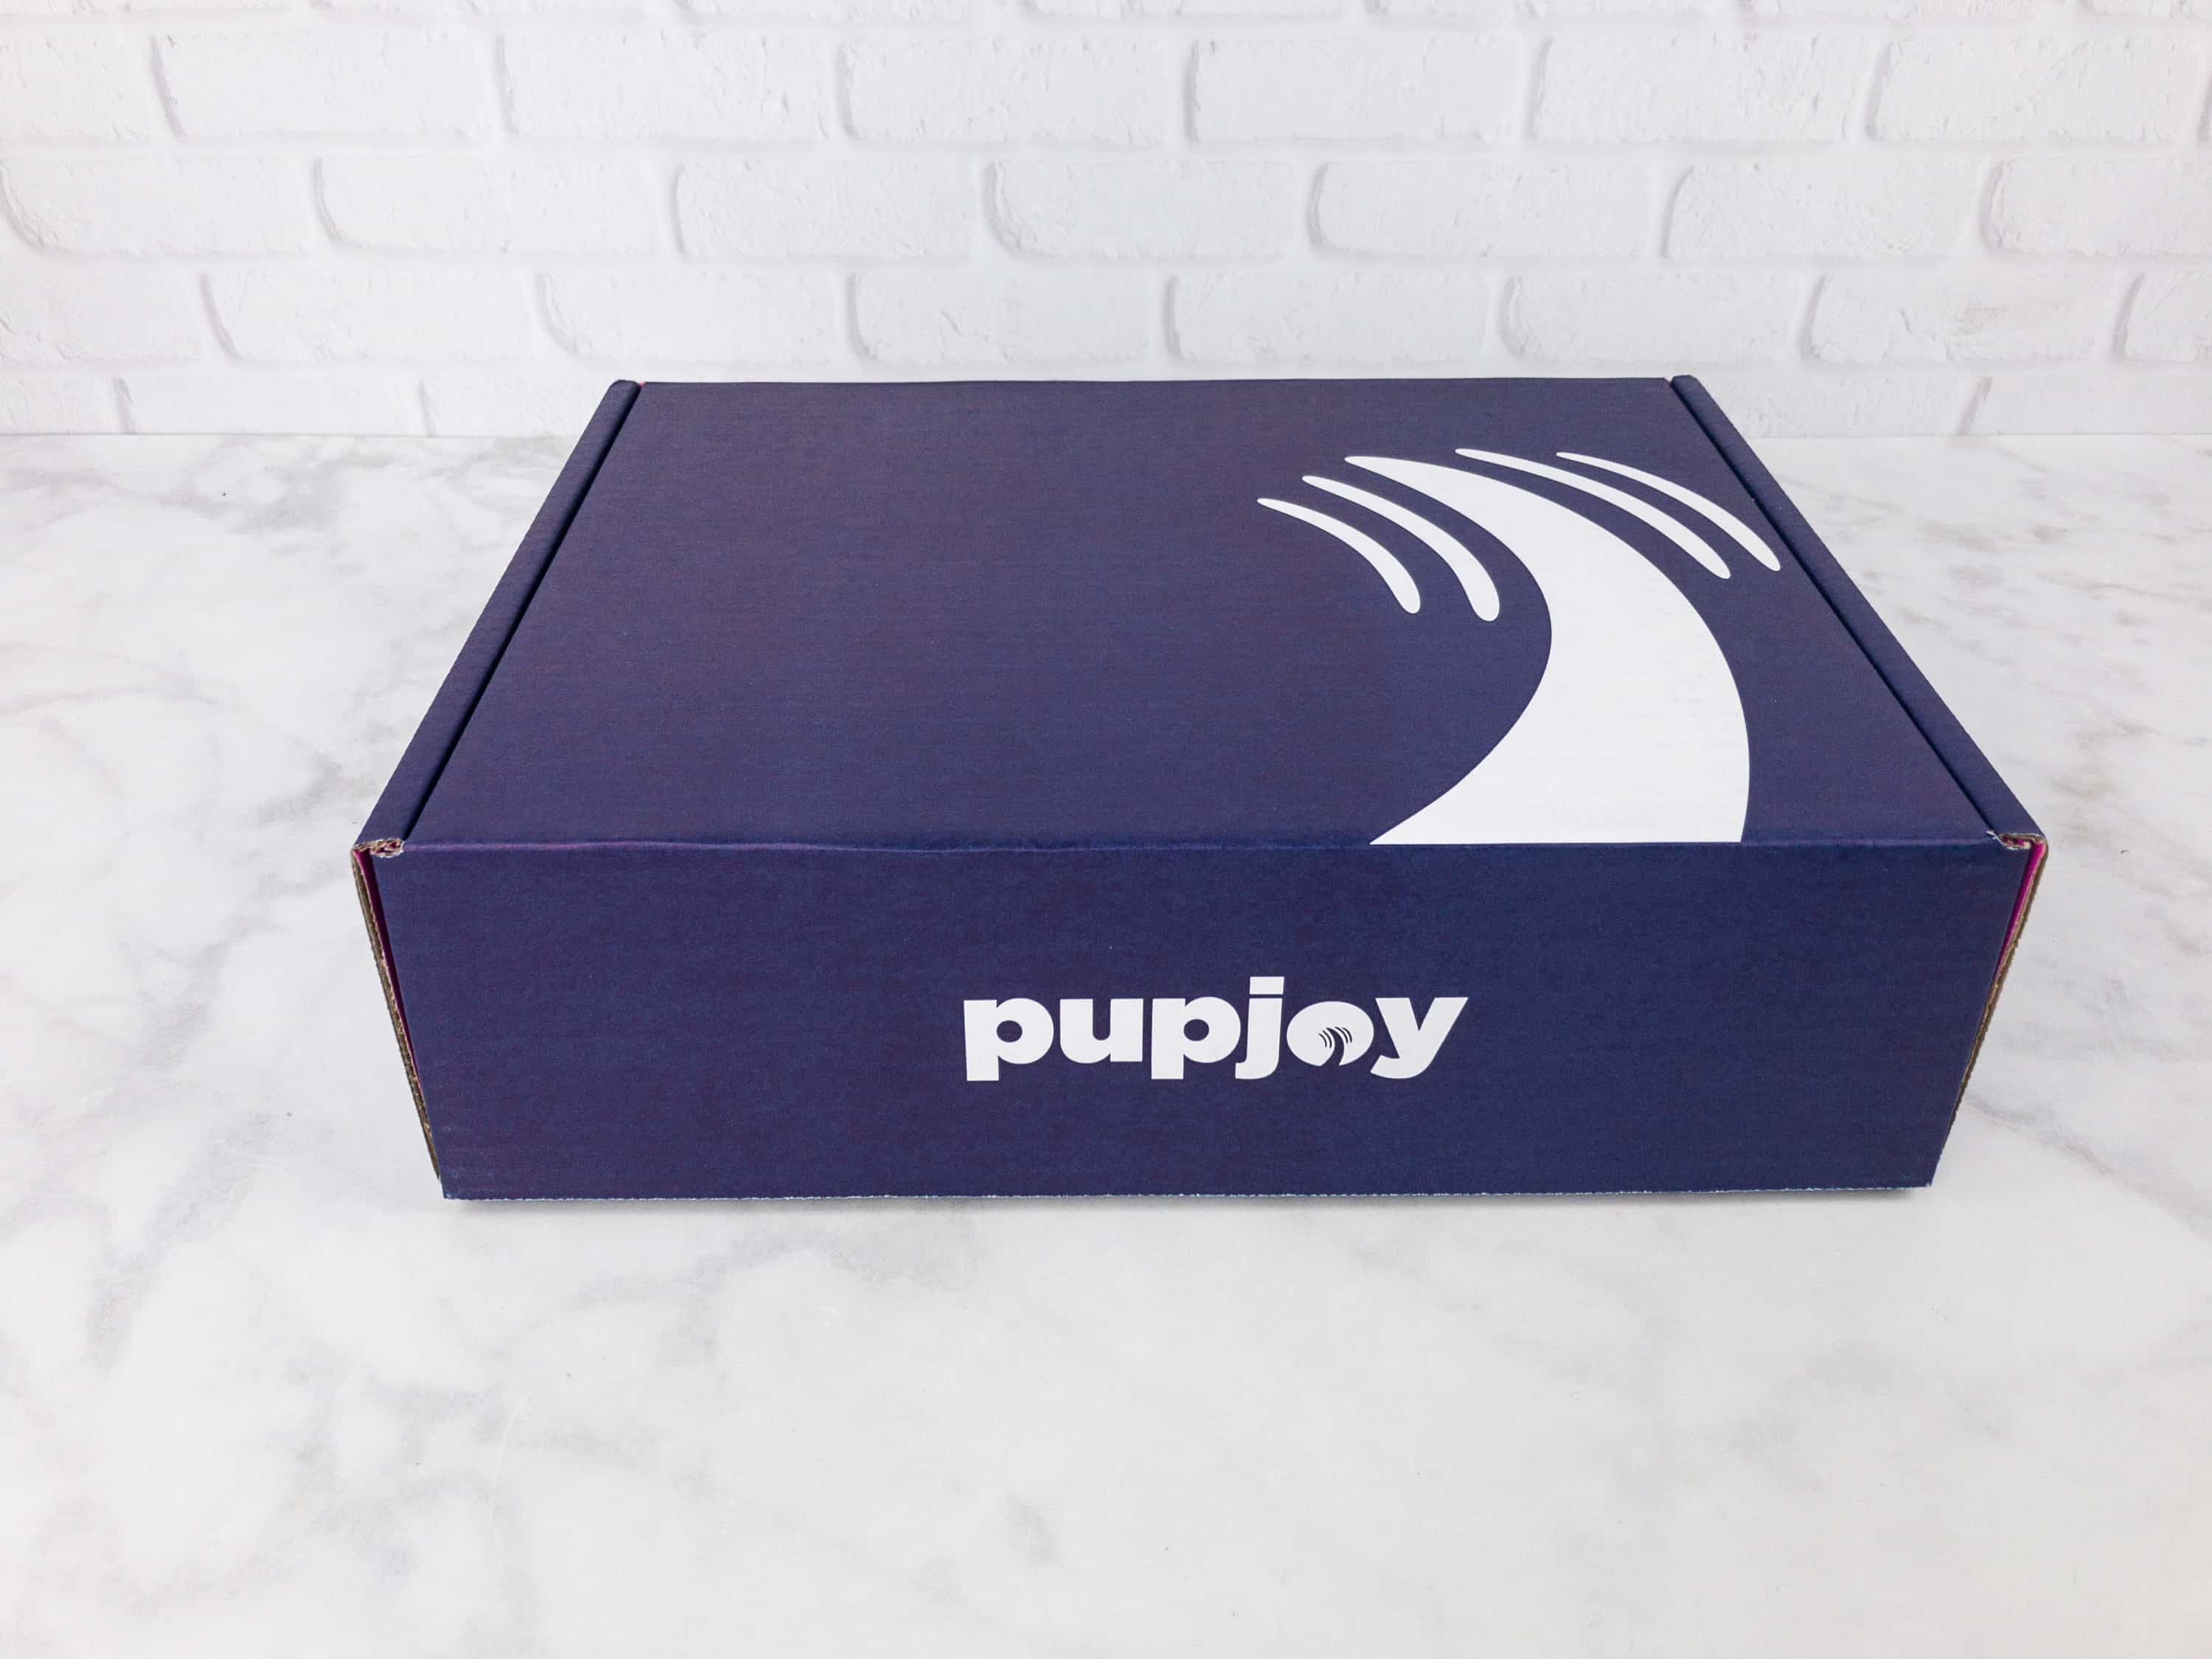 PupJoy September 2017 Subscription Box Review + Coupon - Hello Subscription